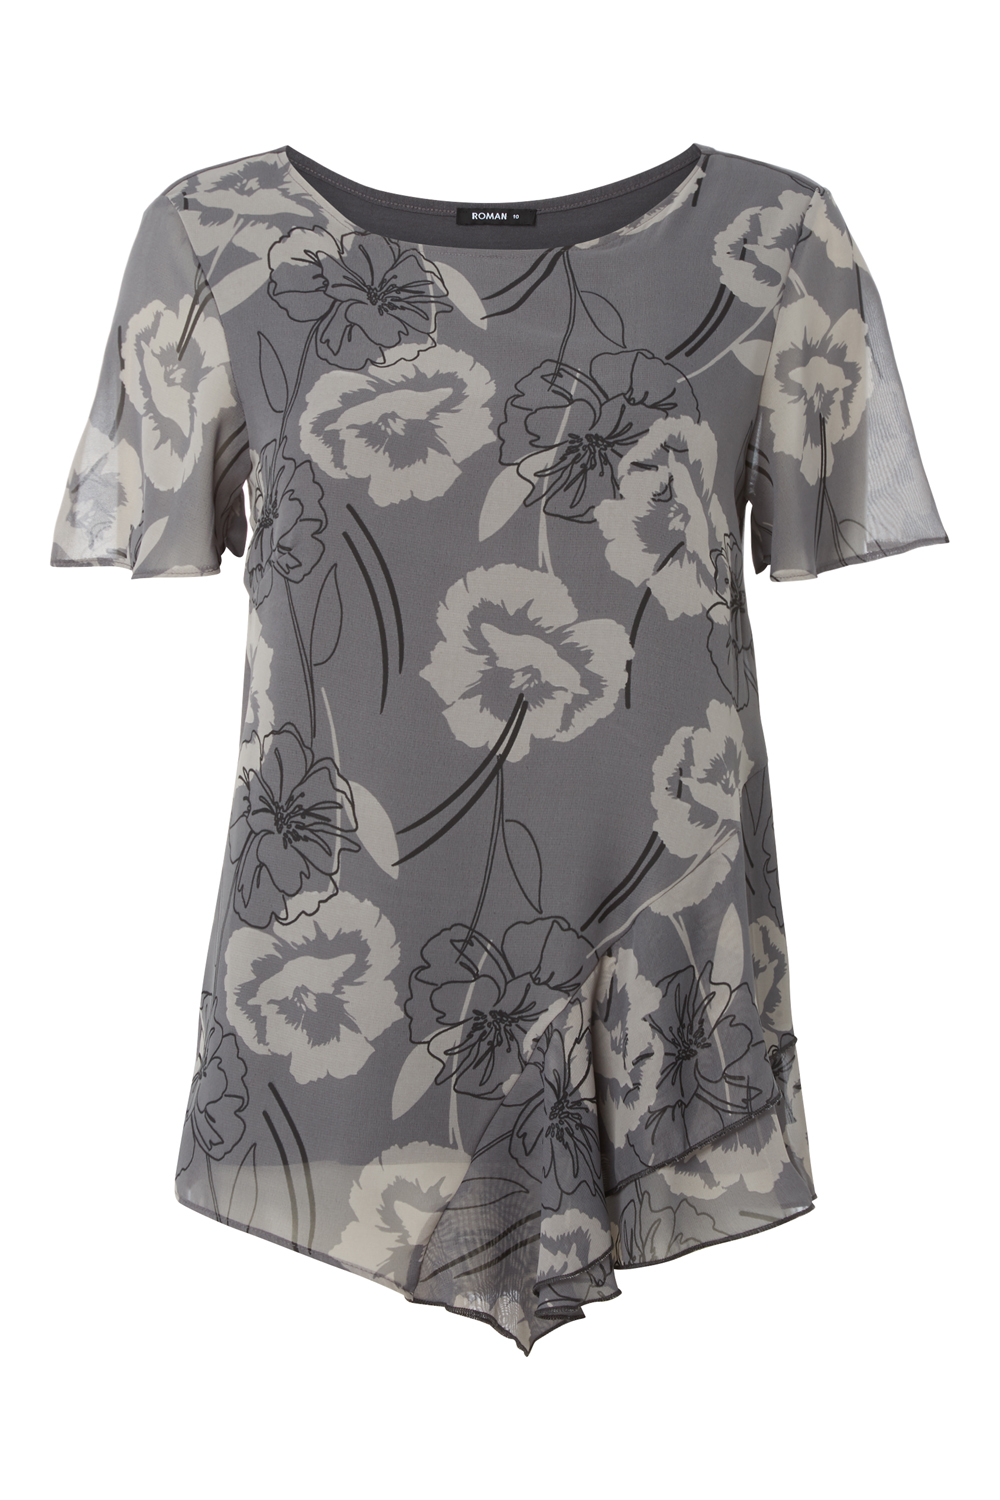 Grey Floral Asymmetric Ruffle Top, Image 4 of 4